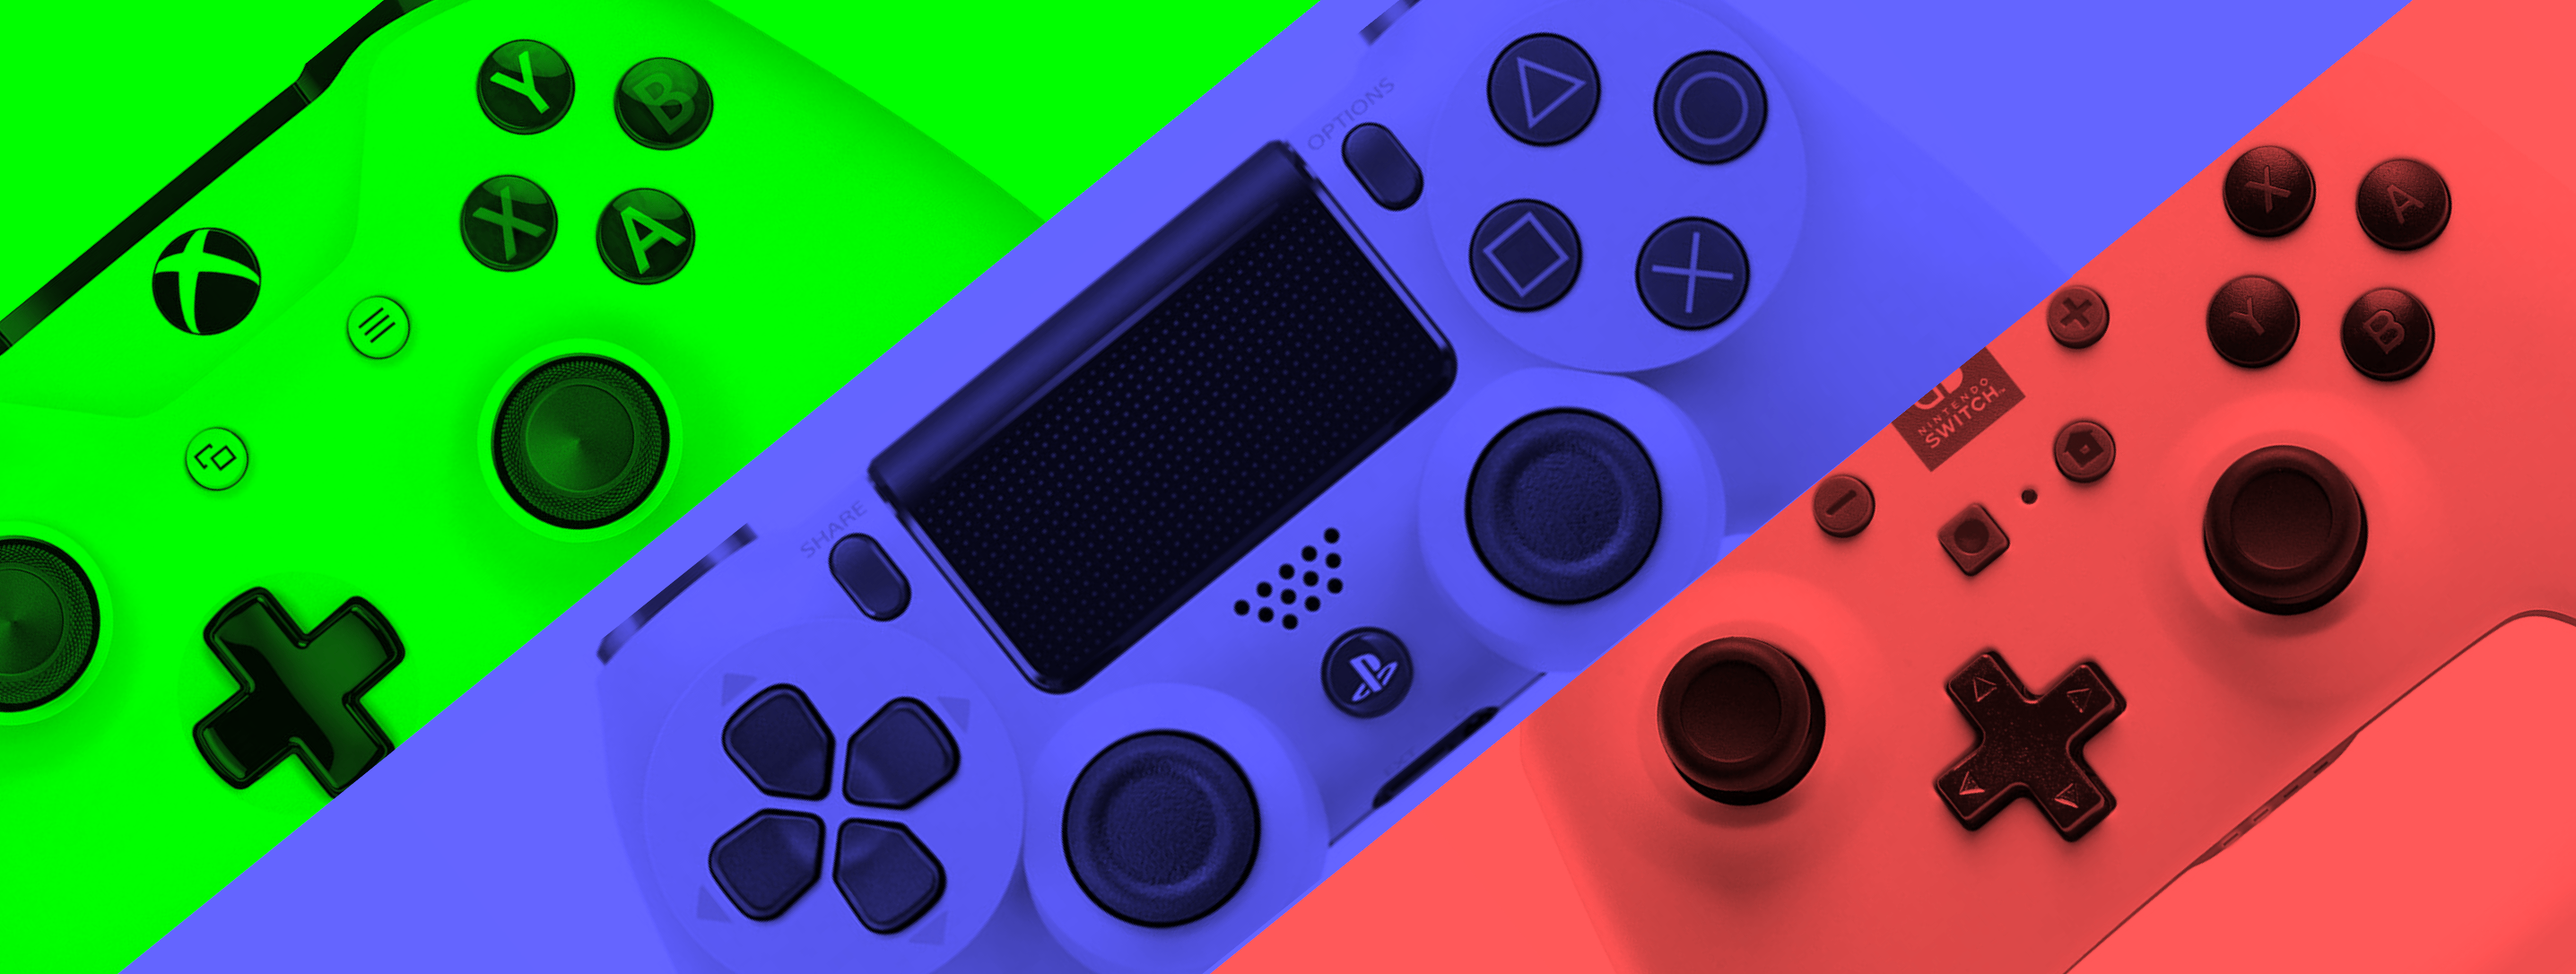 game console examples